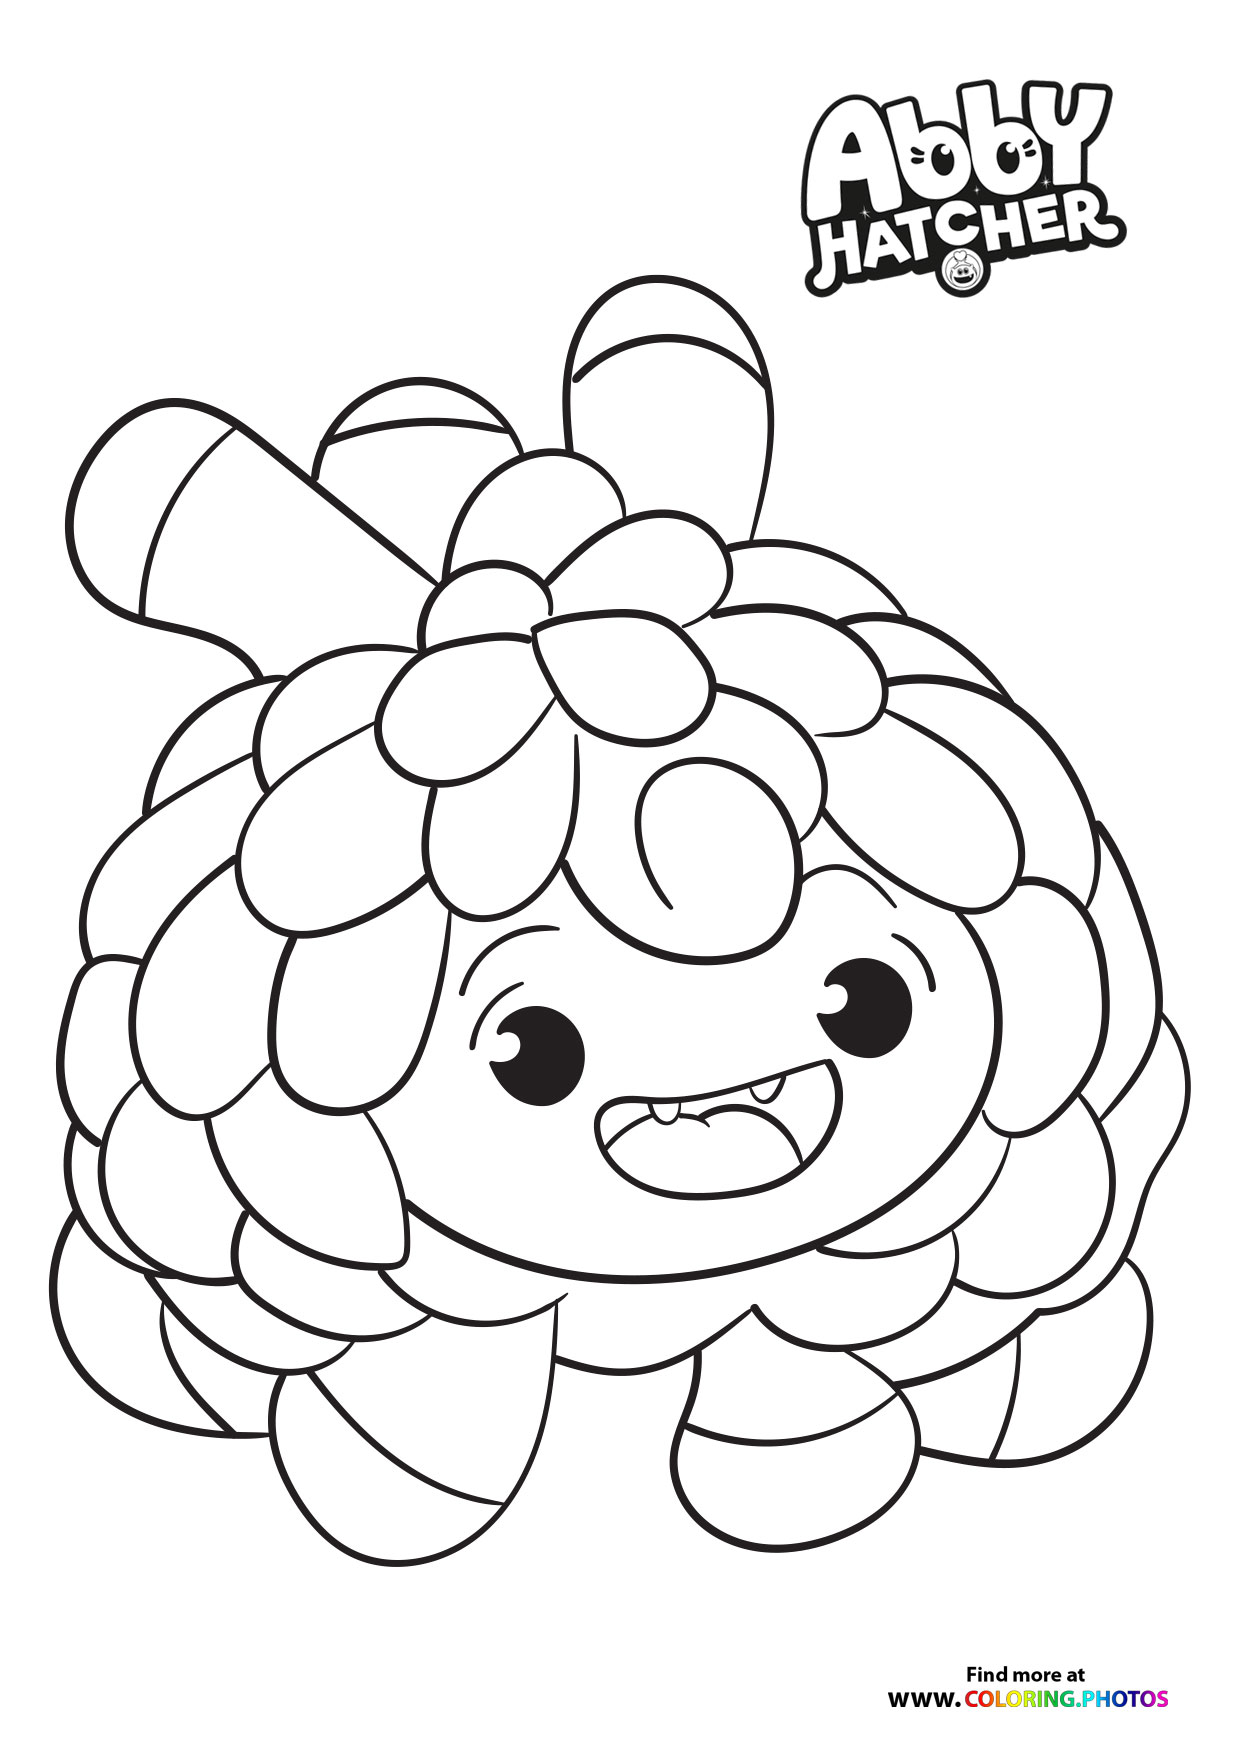 Abby Hatcher Coloring Pages Coloring Pages